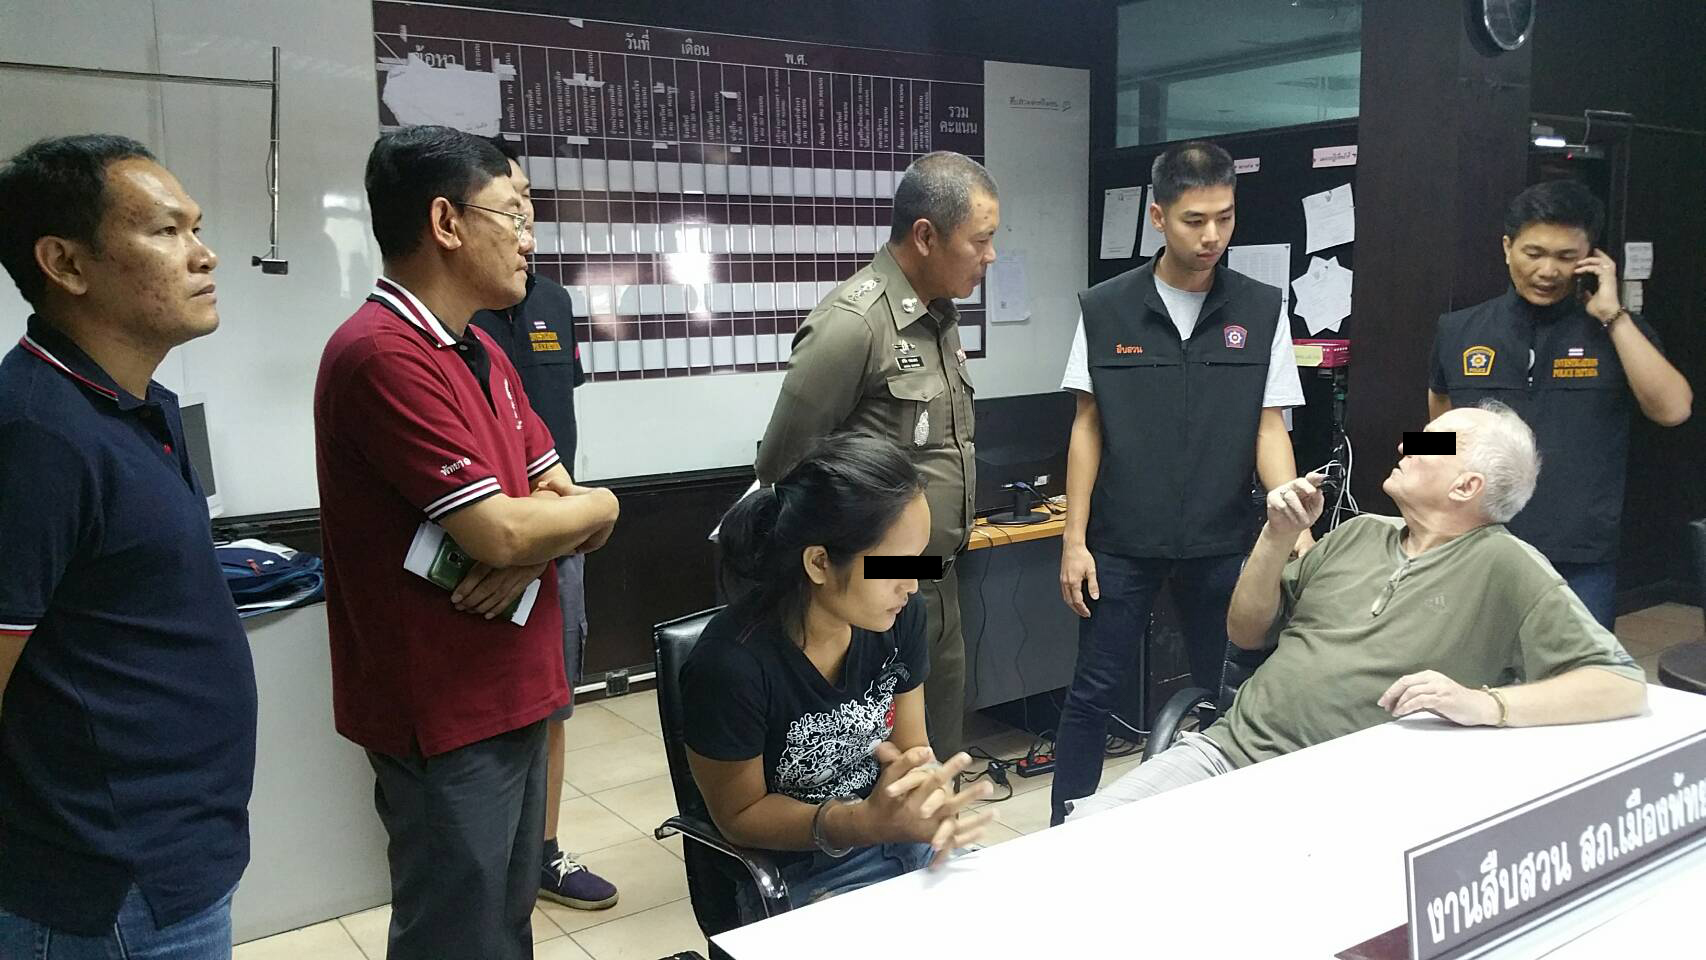 Arne Nielsen (right) was arrested for allegedly hiring an underage boy for sex, and Somboon Supasaen (left) was charged with robbing a Briton in December.